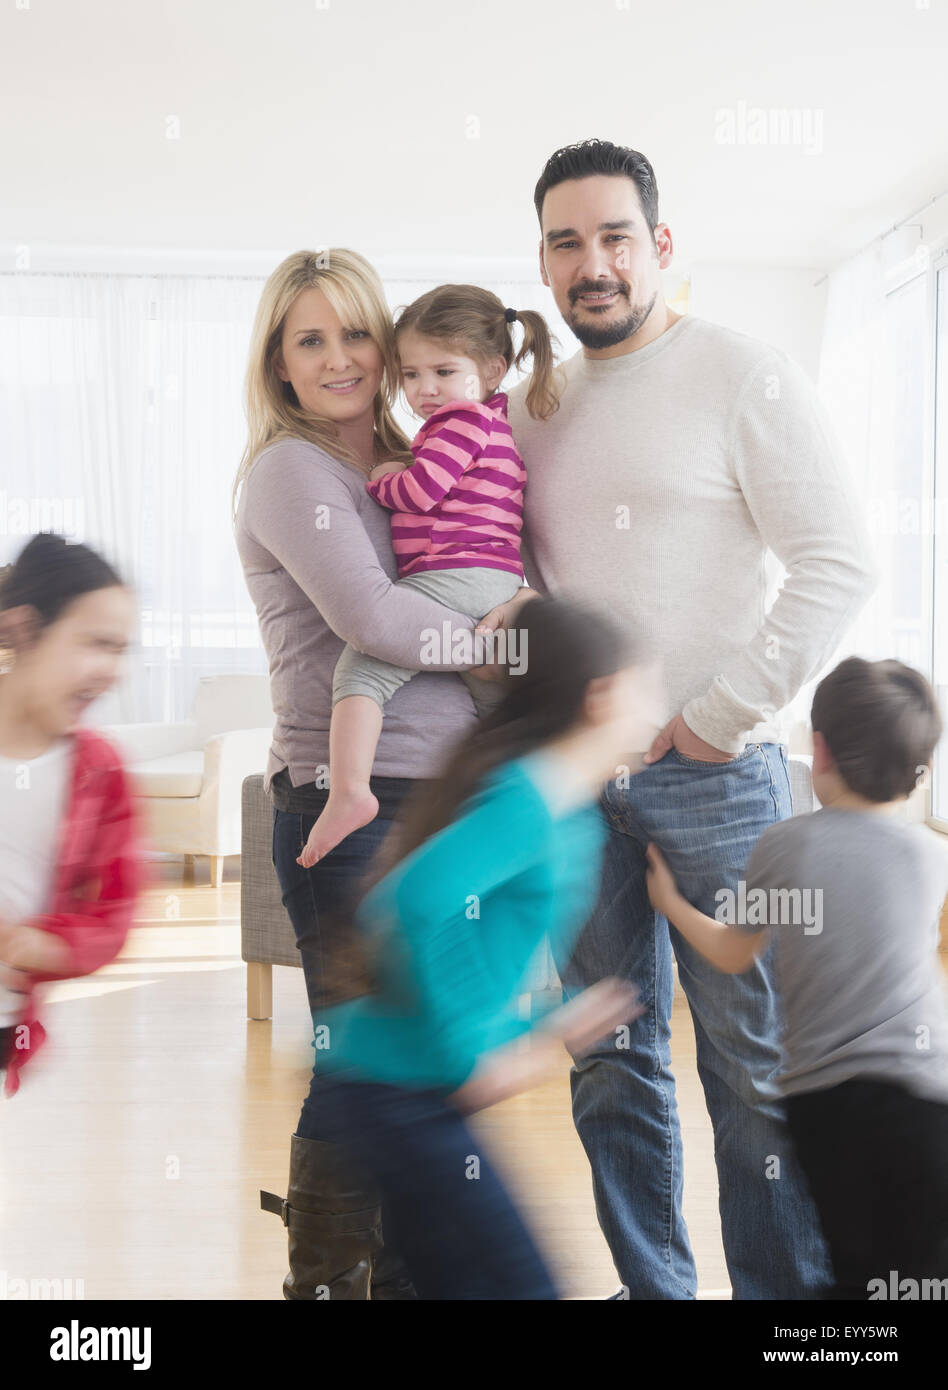 Caucasian parents busy with running children Stock Photo